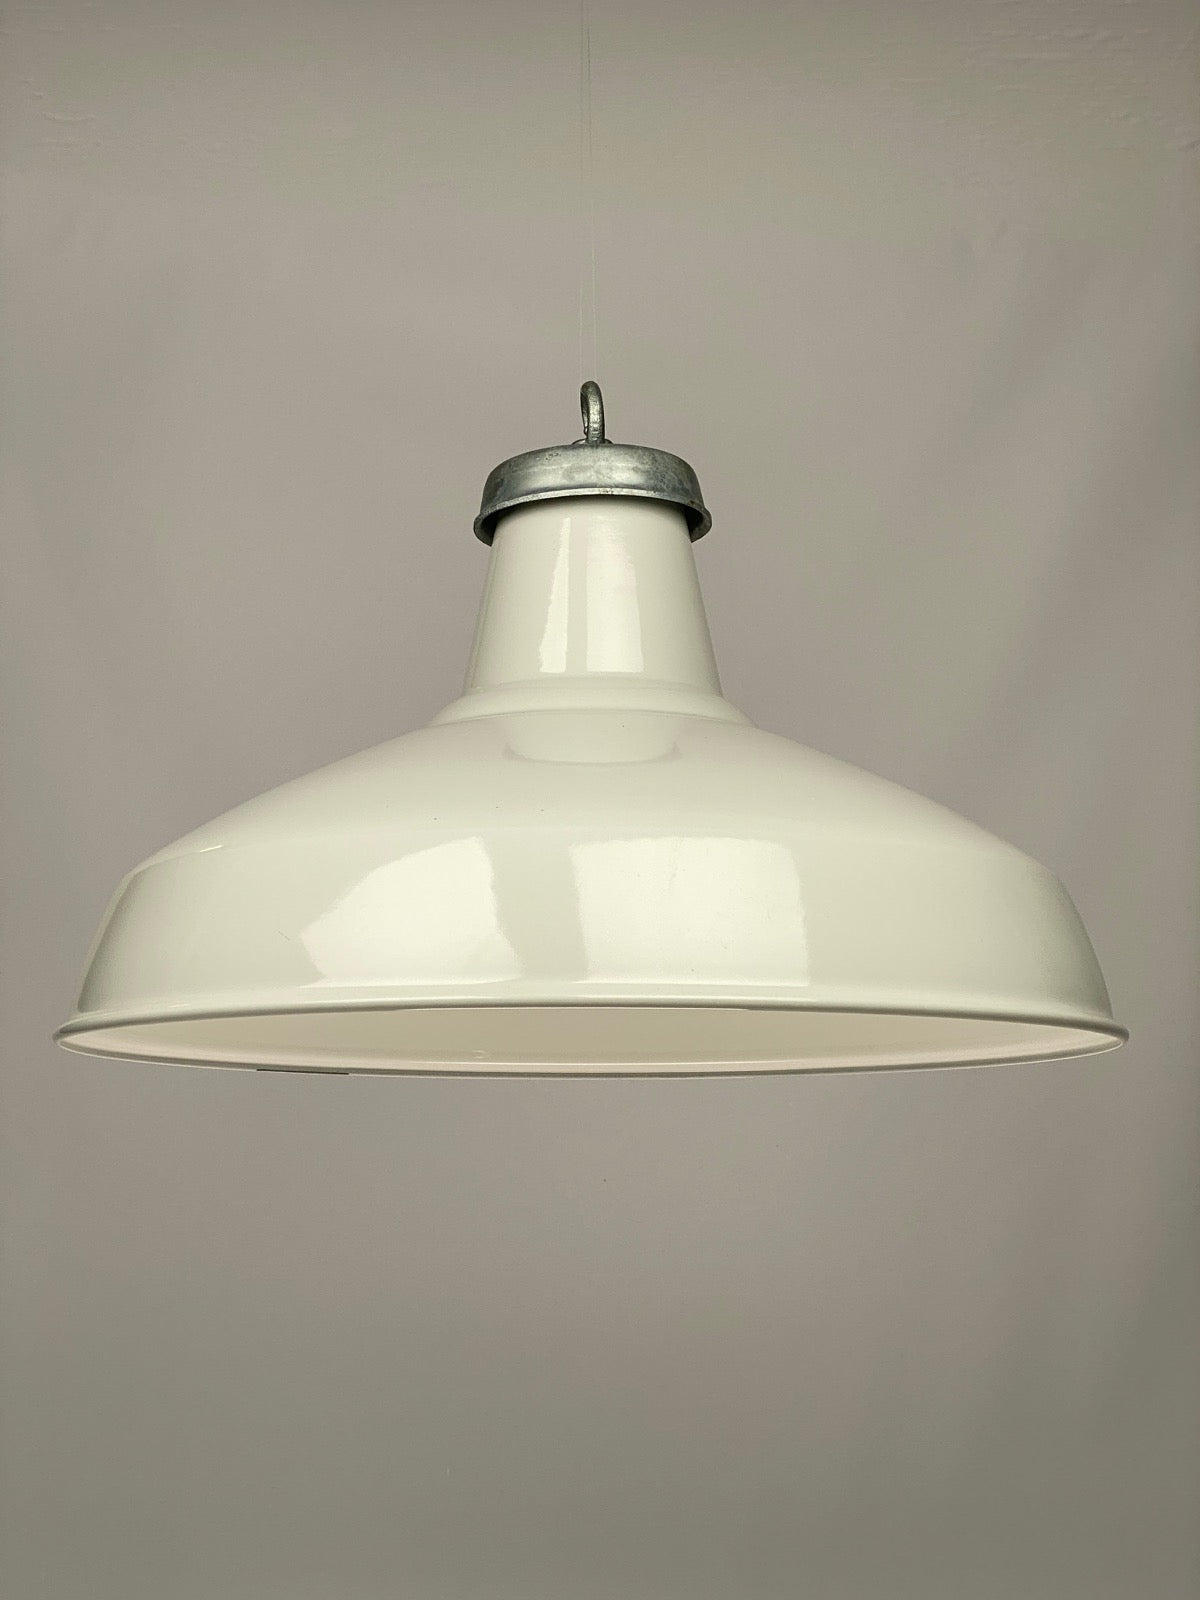 An example of a white enamel 50cm lamp shade available in Worn Lighting.